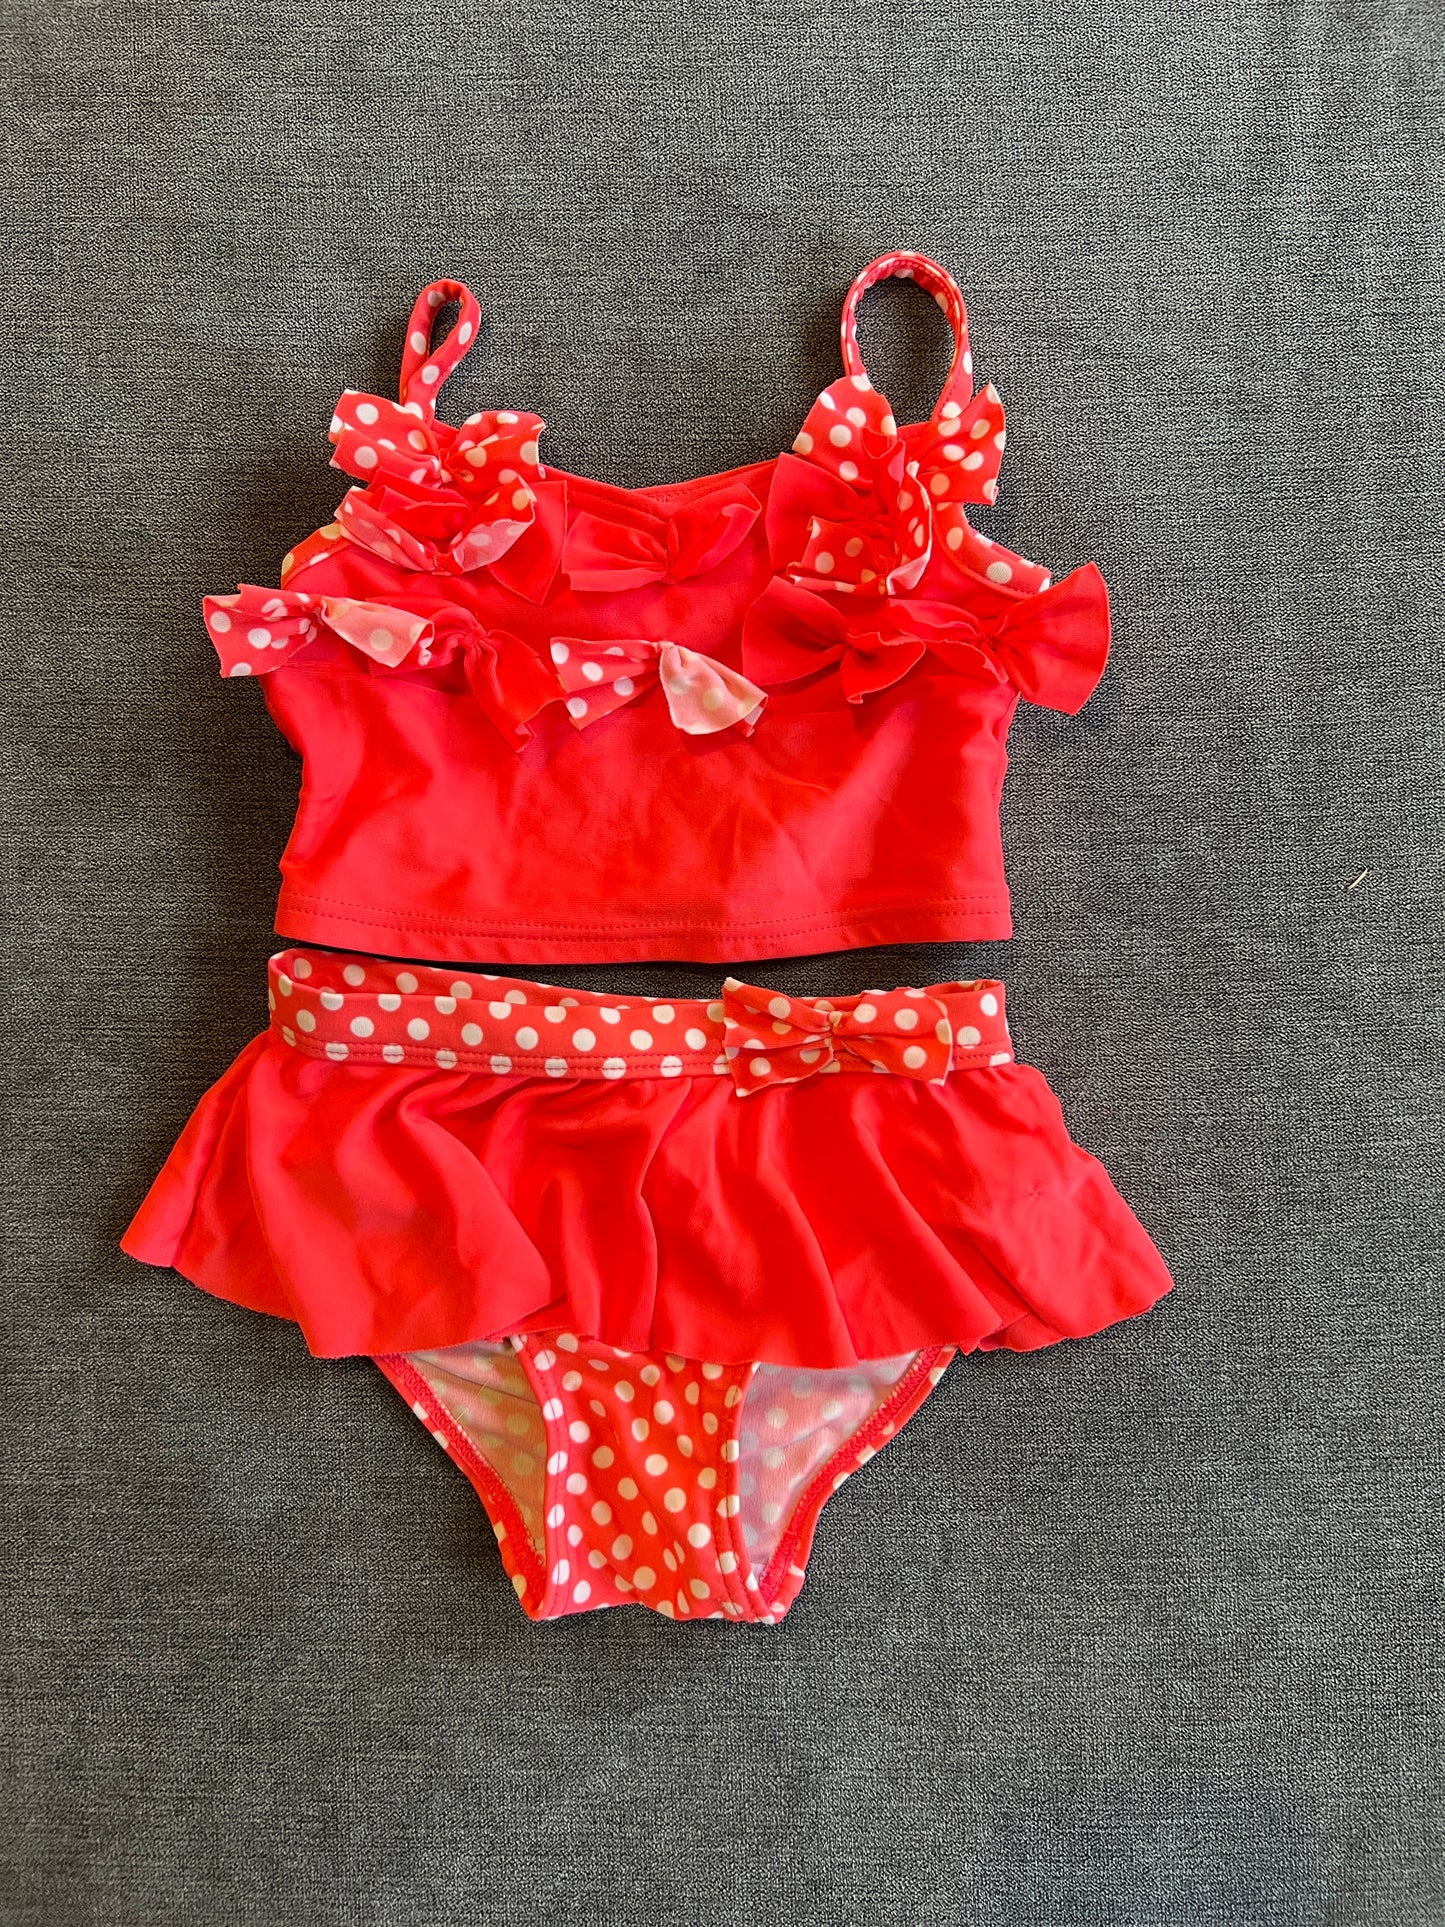 Girls 2T Two Piece Hot Pink Swimsuit